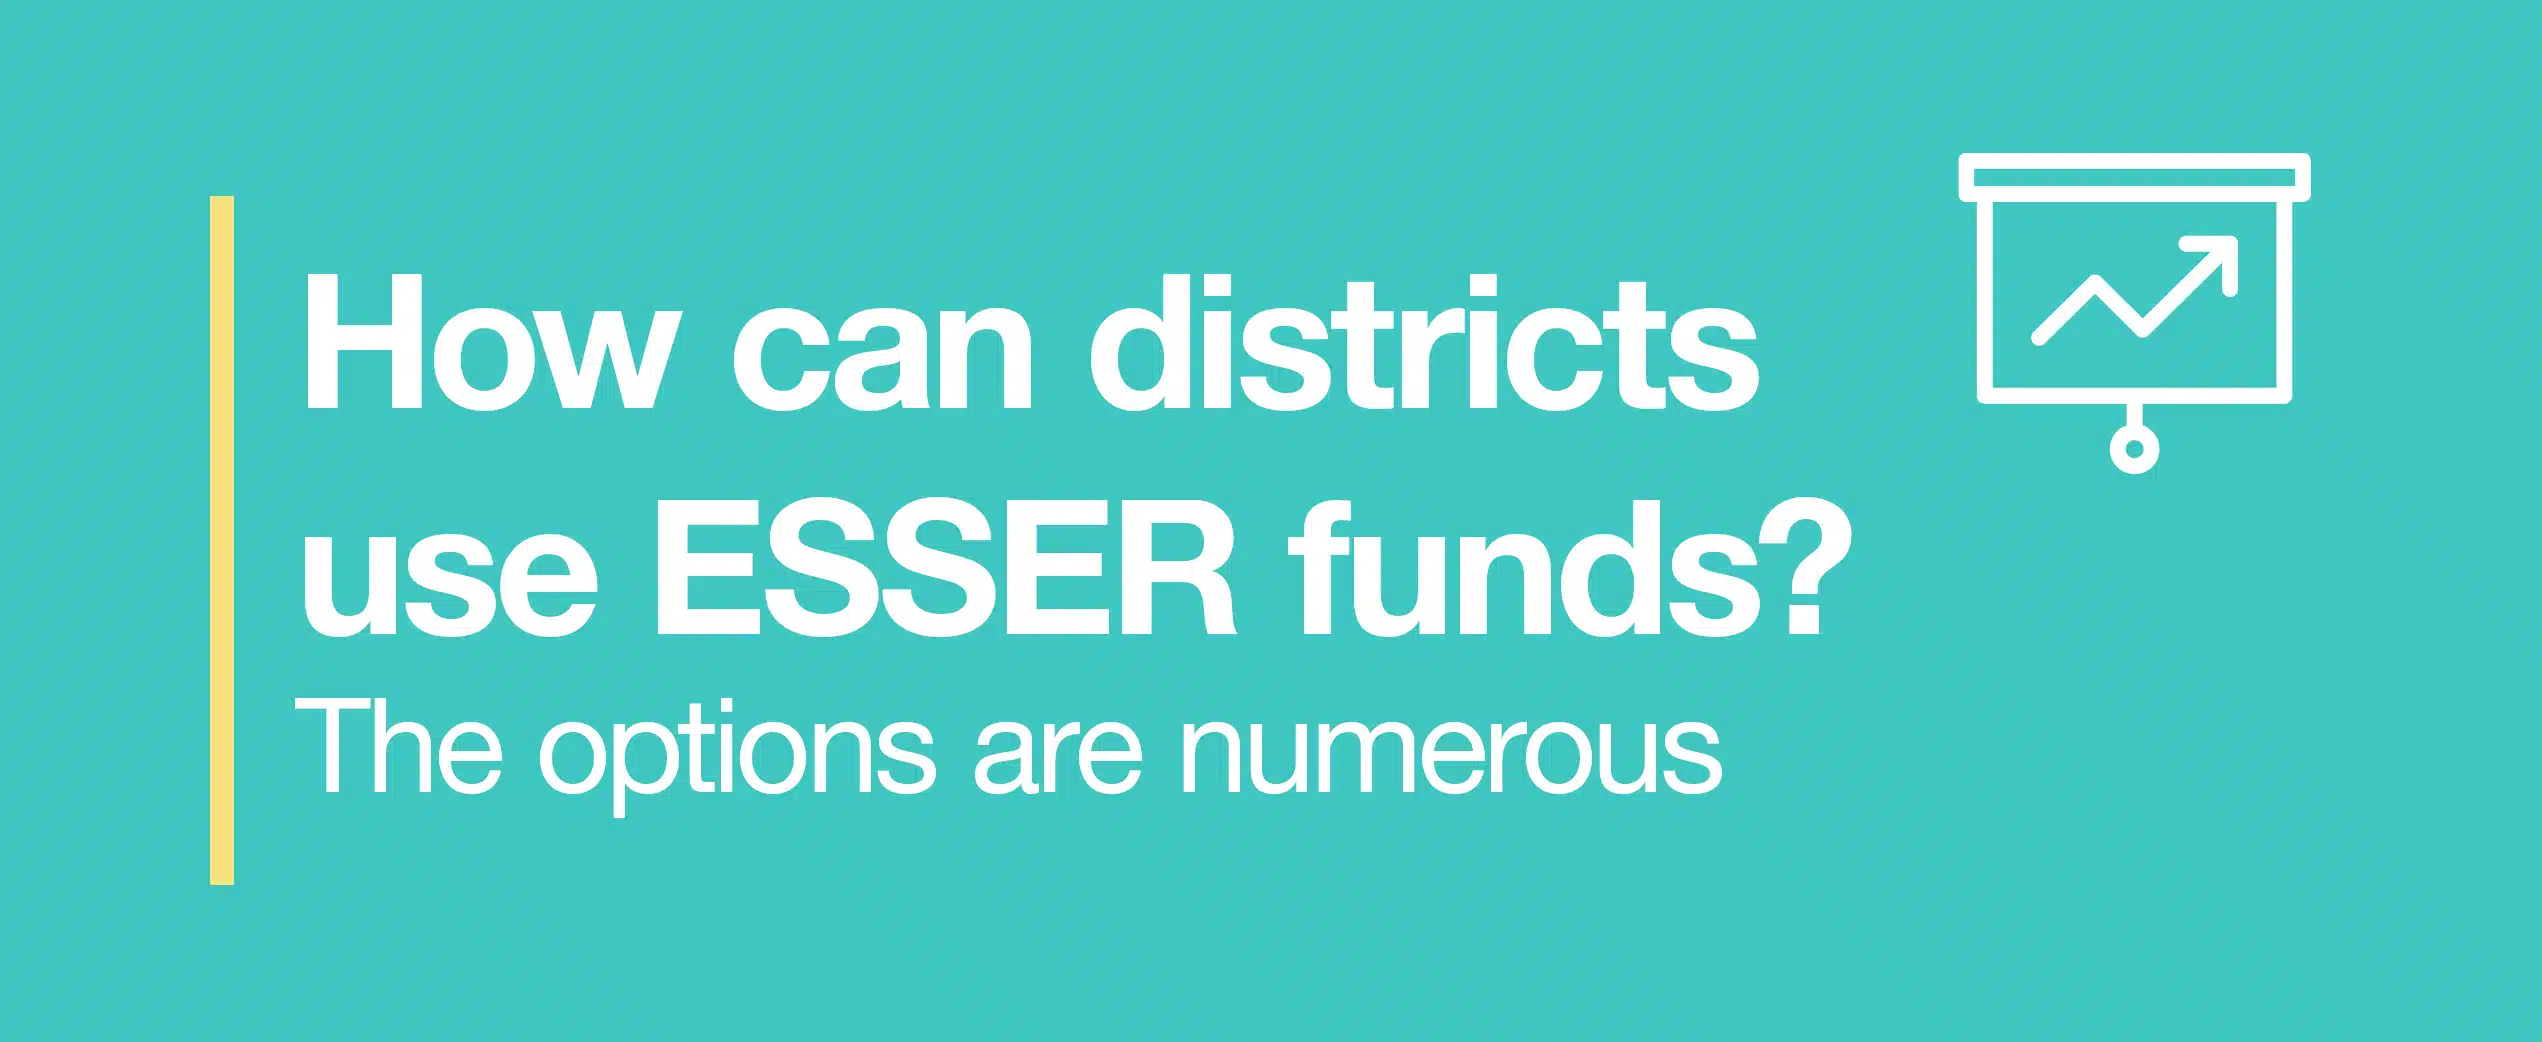 How can districts use ESSER funds?